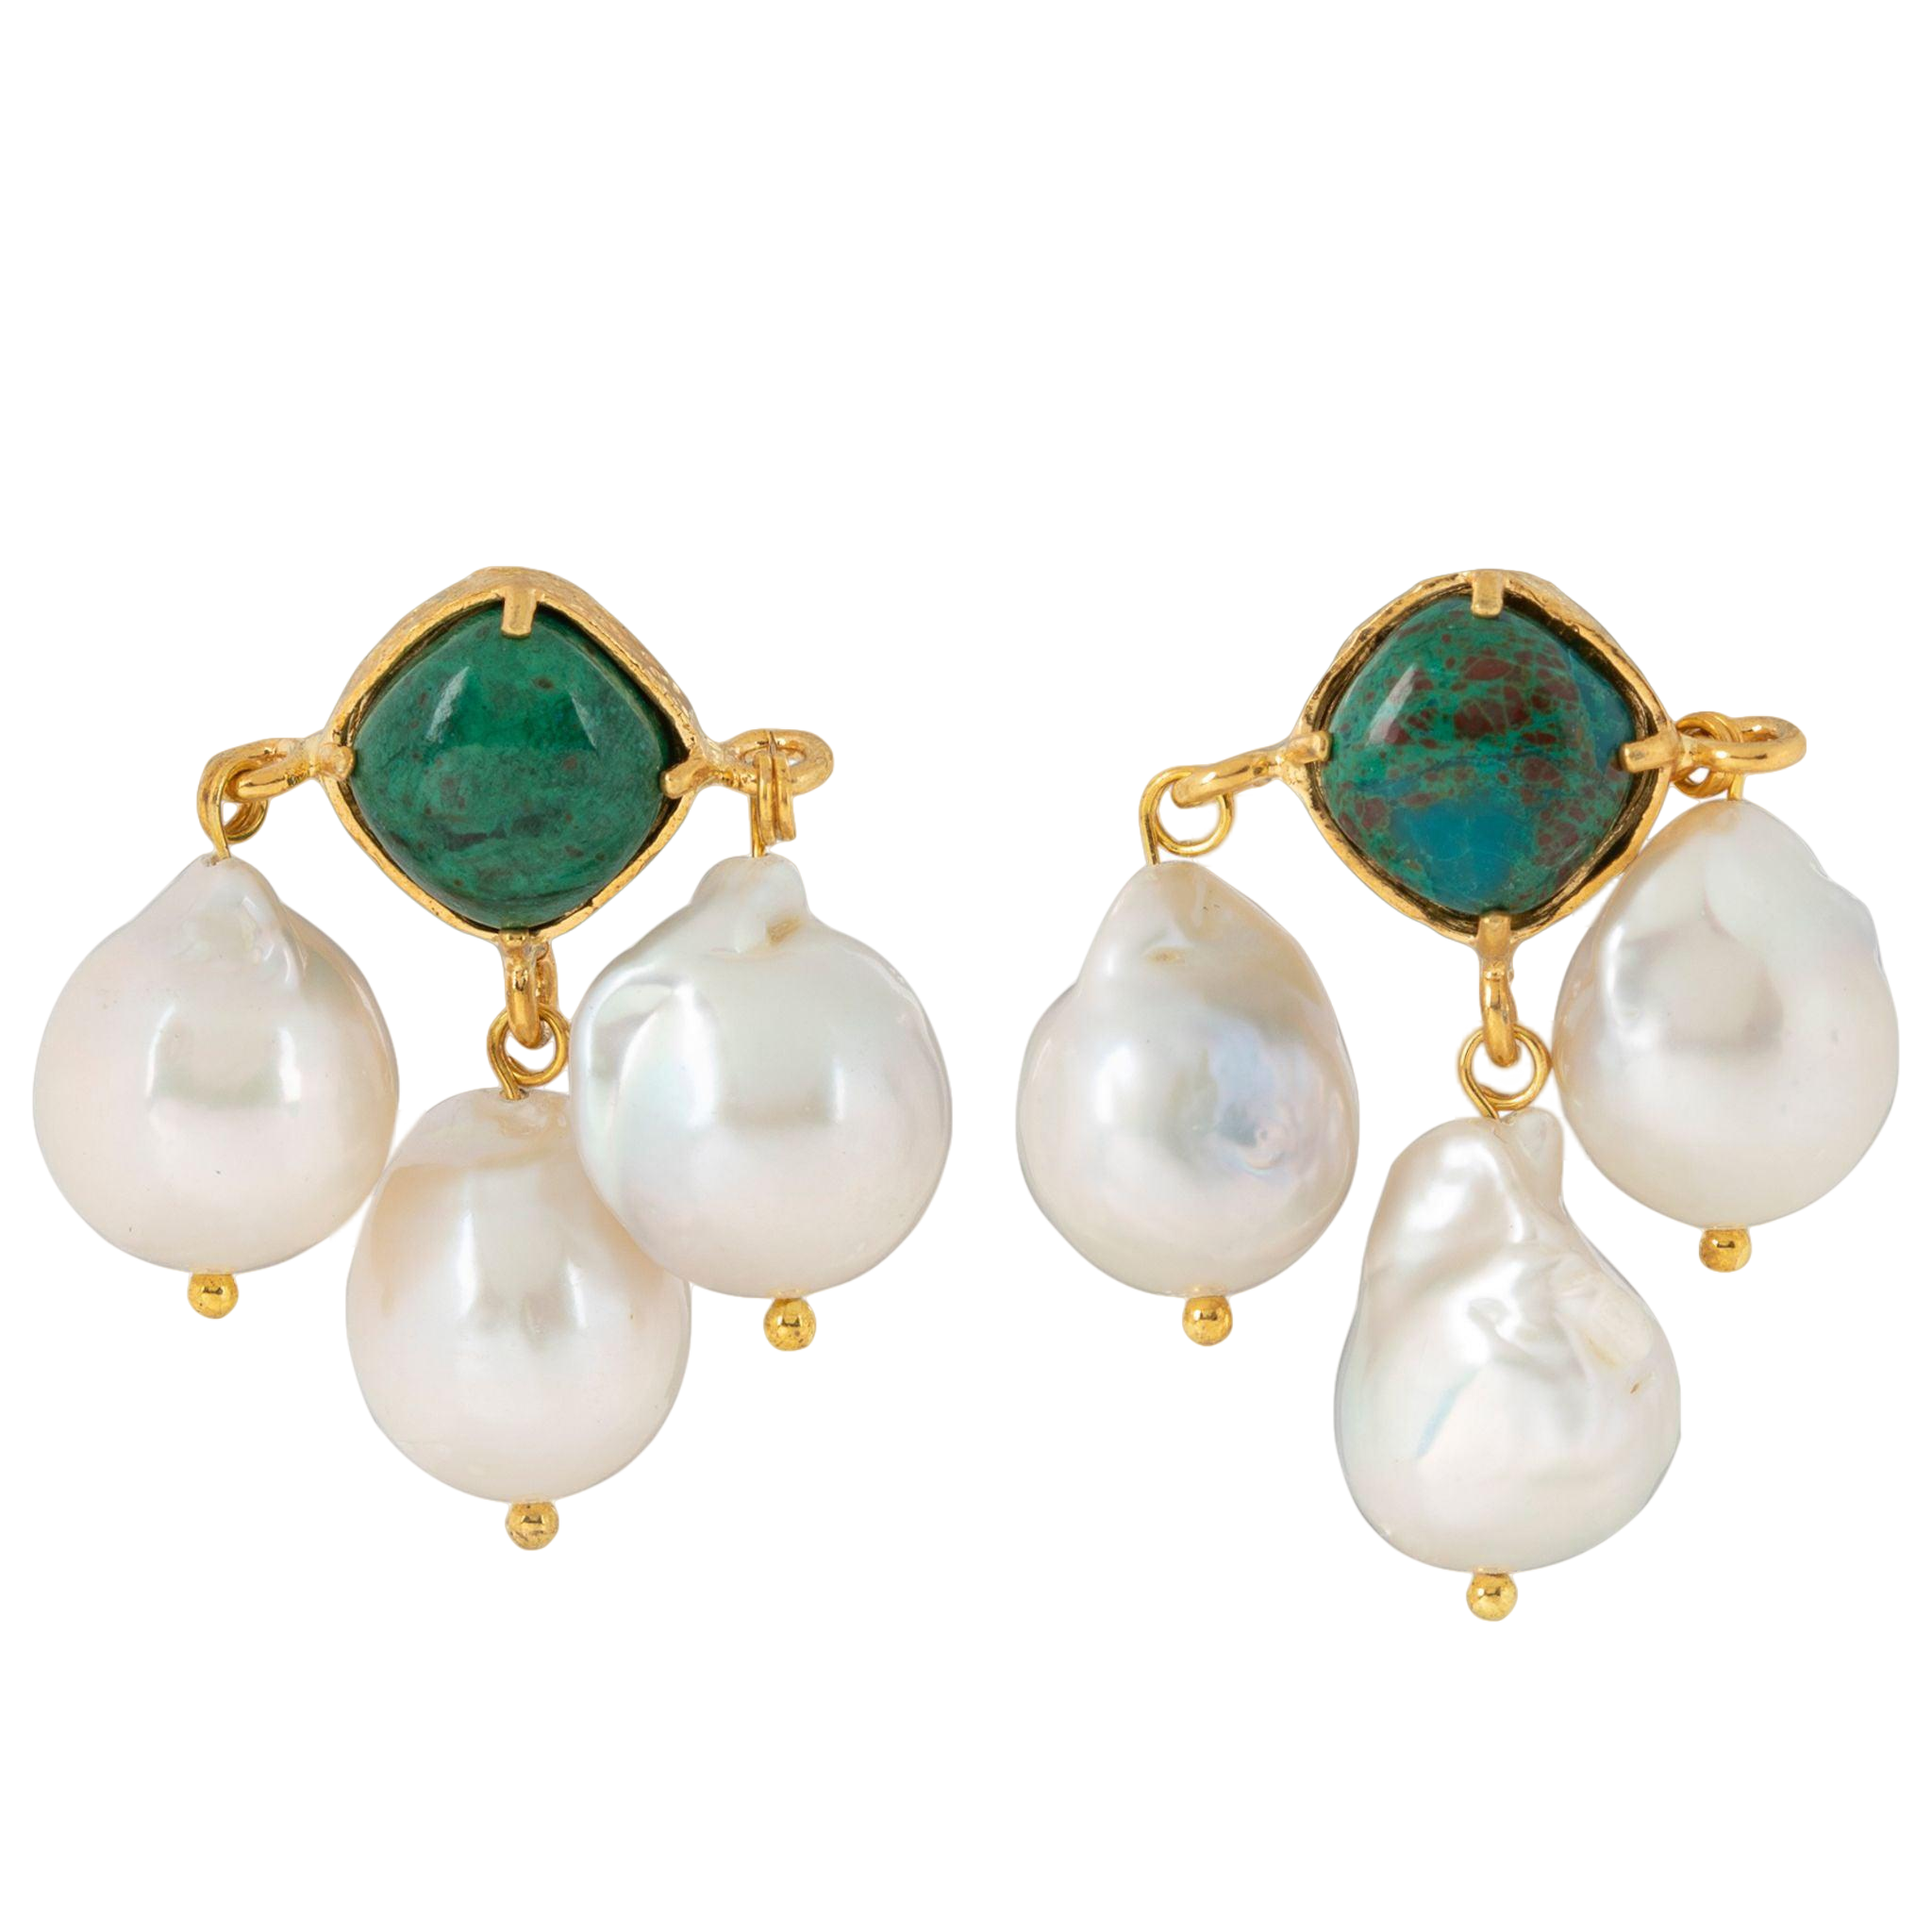 Christie Nicolaides Ludovica Earrings Turquoise